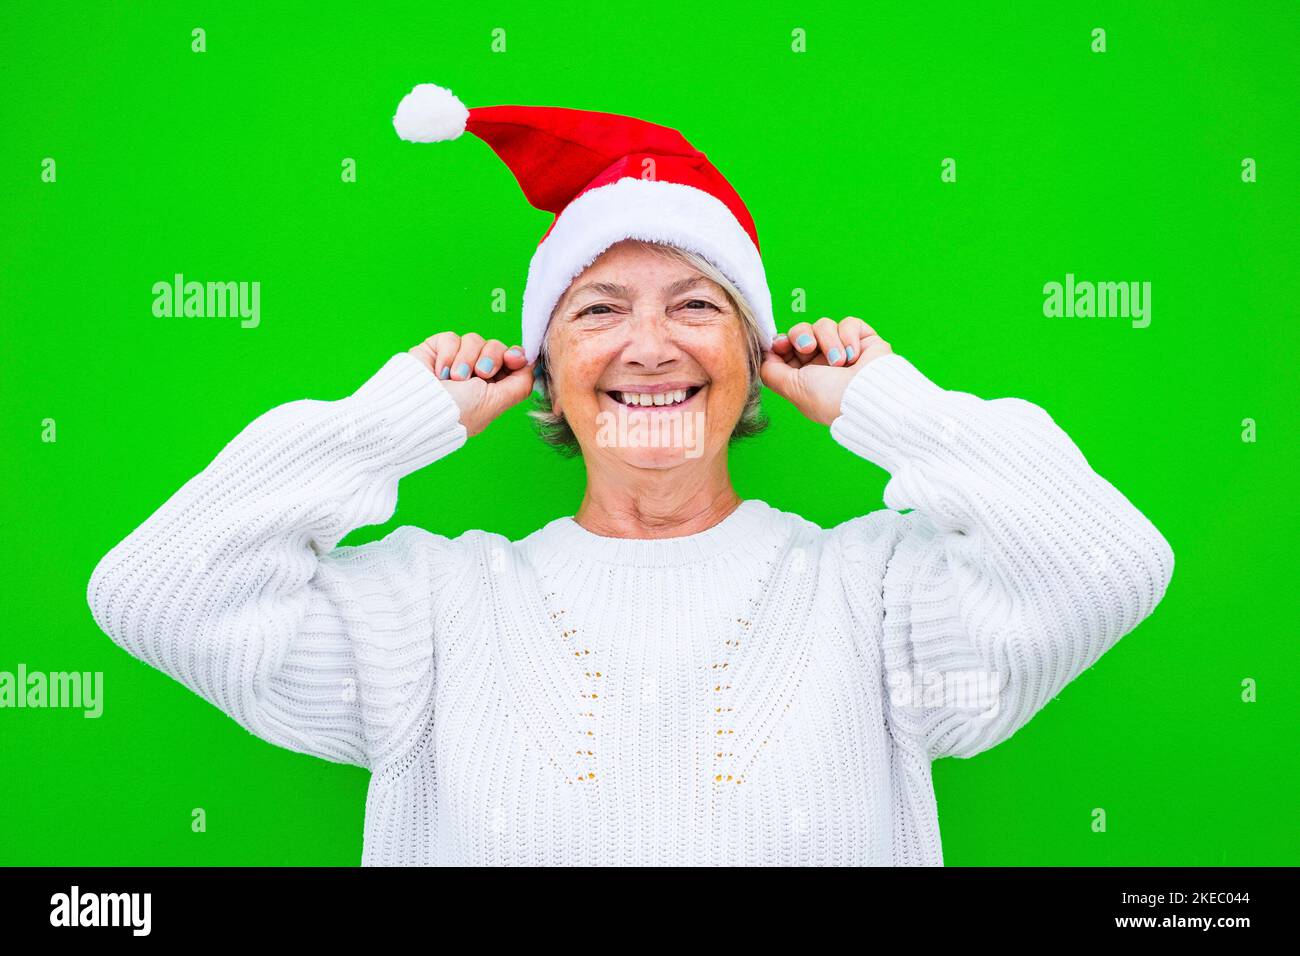 portrait and close up of old and mature woman smiling and having fun looking at the camera wearing christmas clothes with green background Stock Photo